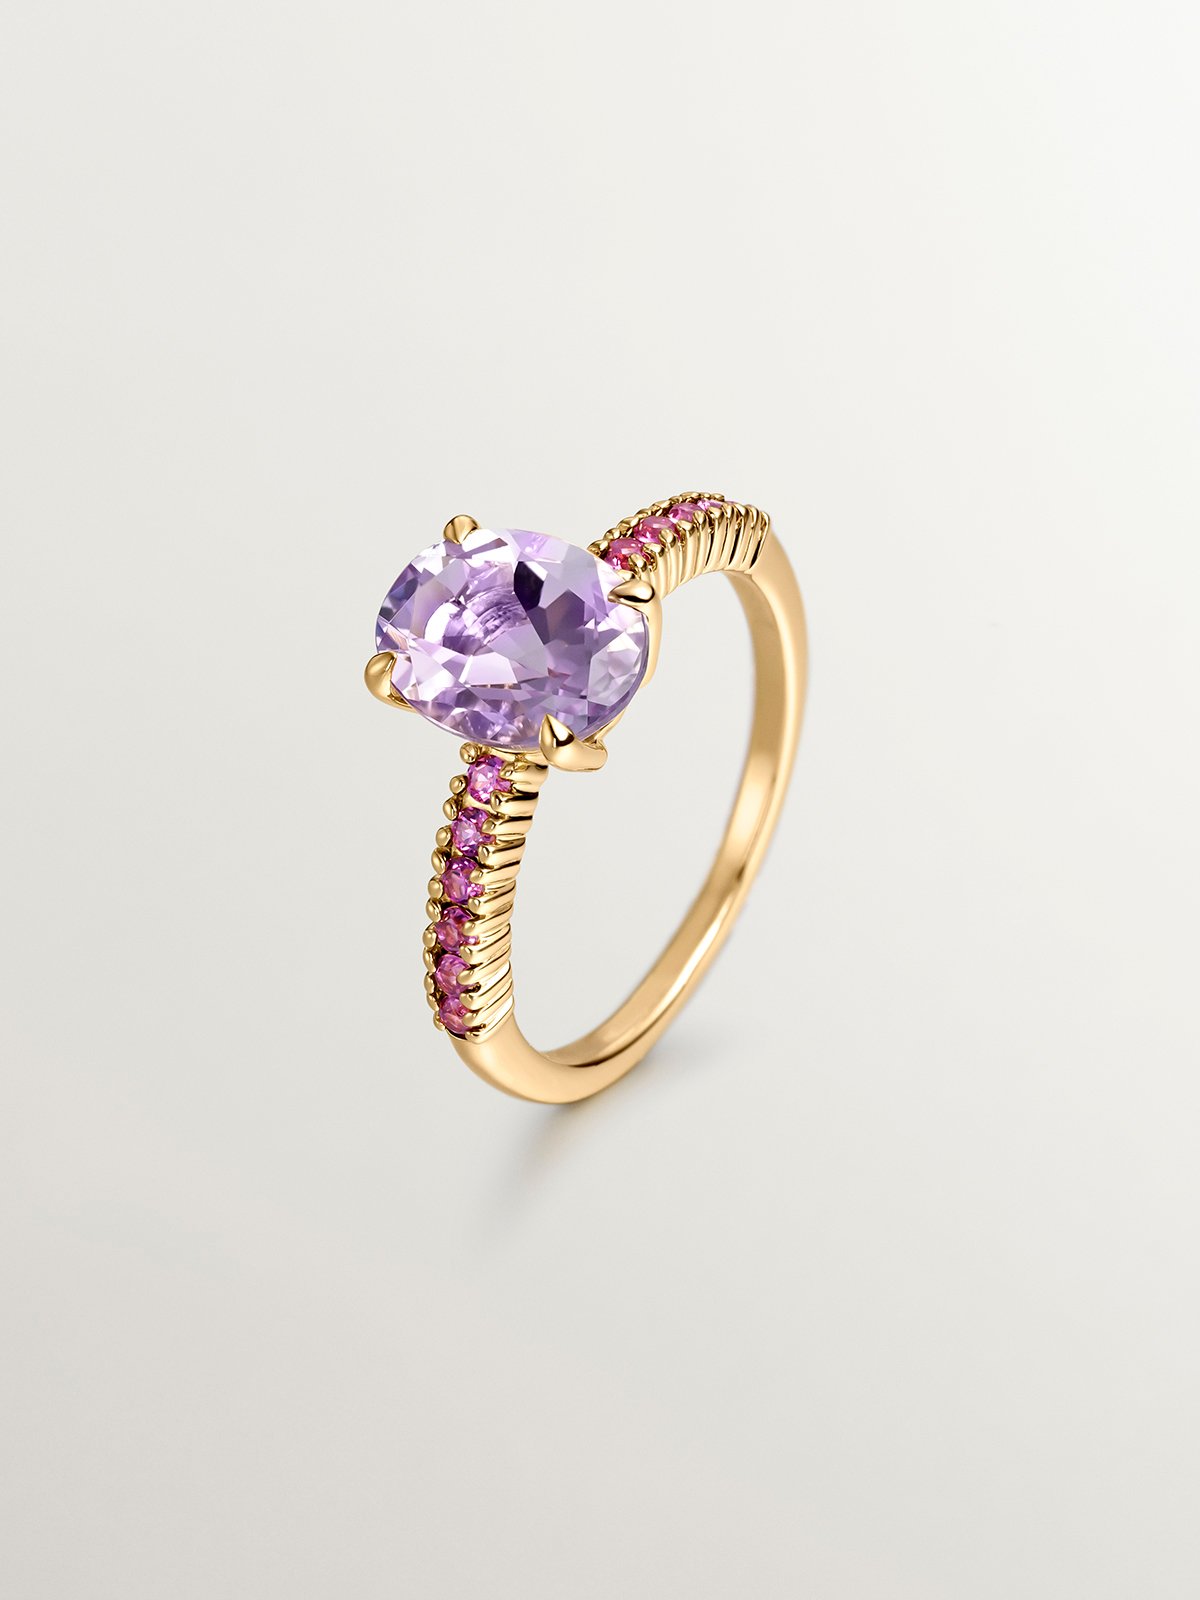 925 Silver ring bathed in 18K yellow gold with purple amethyst and pink rhodolites.